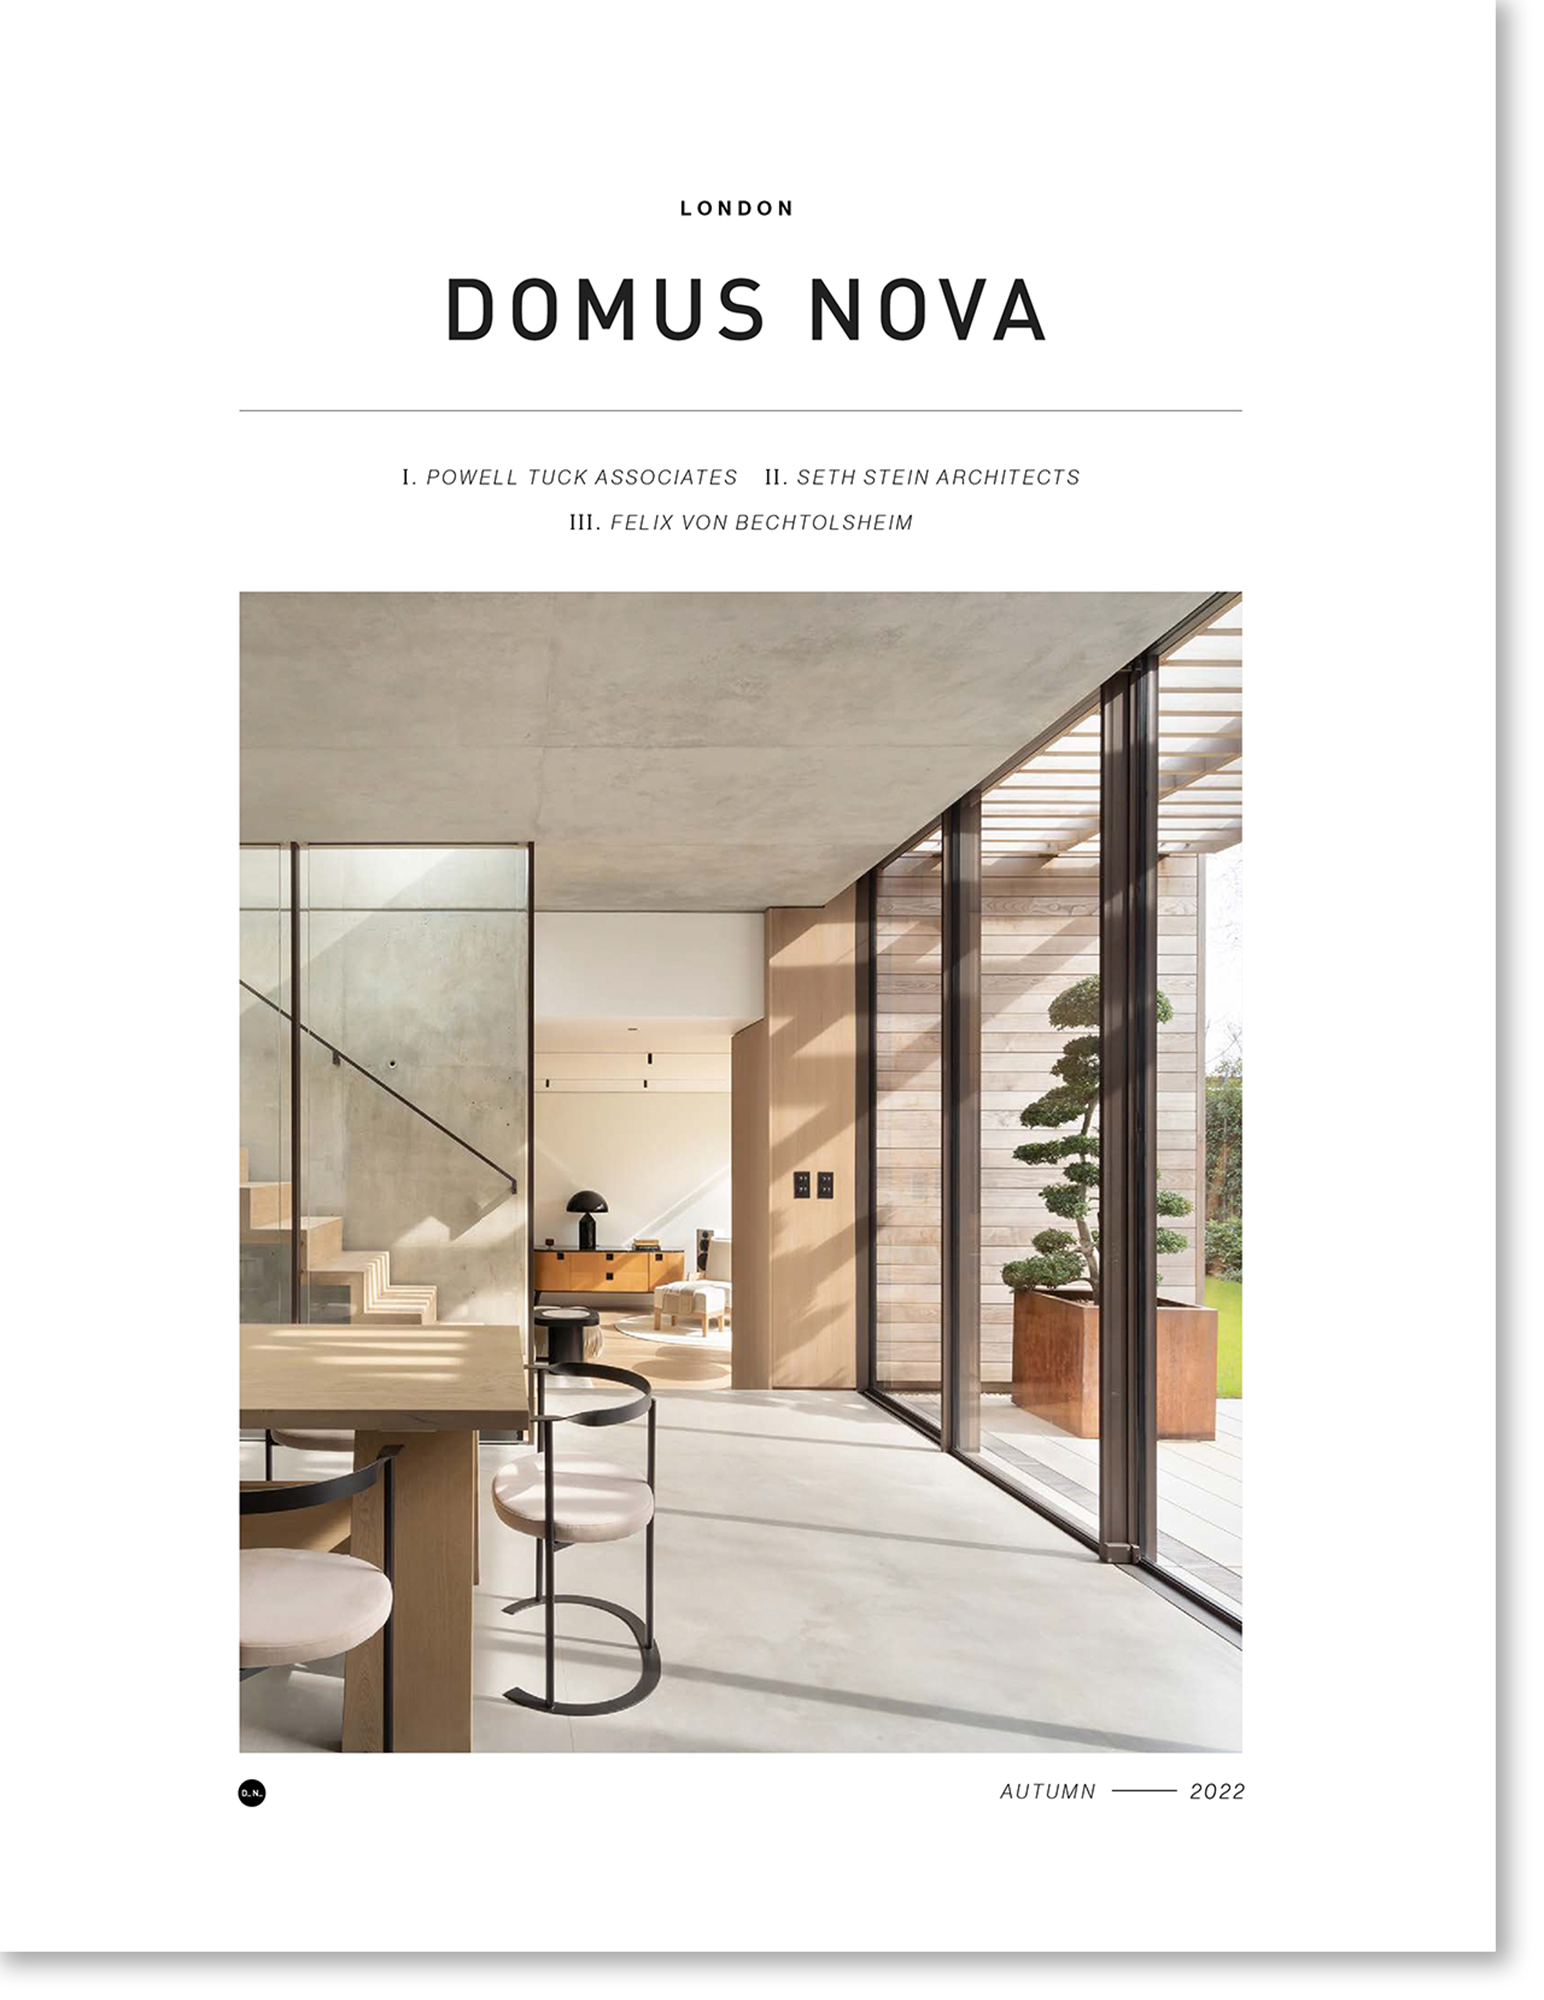 A magazine cover featuring a modern, industrial kitchen and reception room